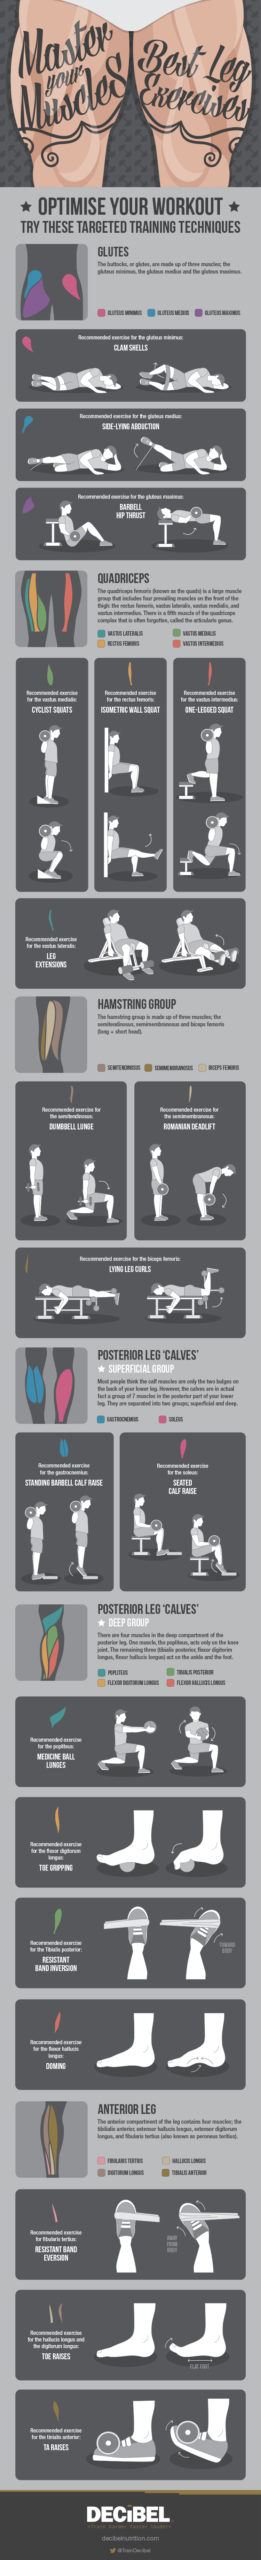 Learn How To Bulk Up Your Chicken Legs With These Exercises [Infographic]